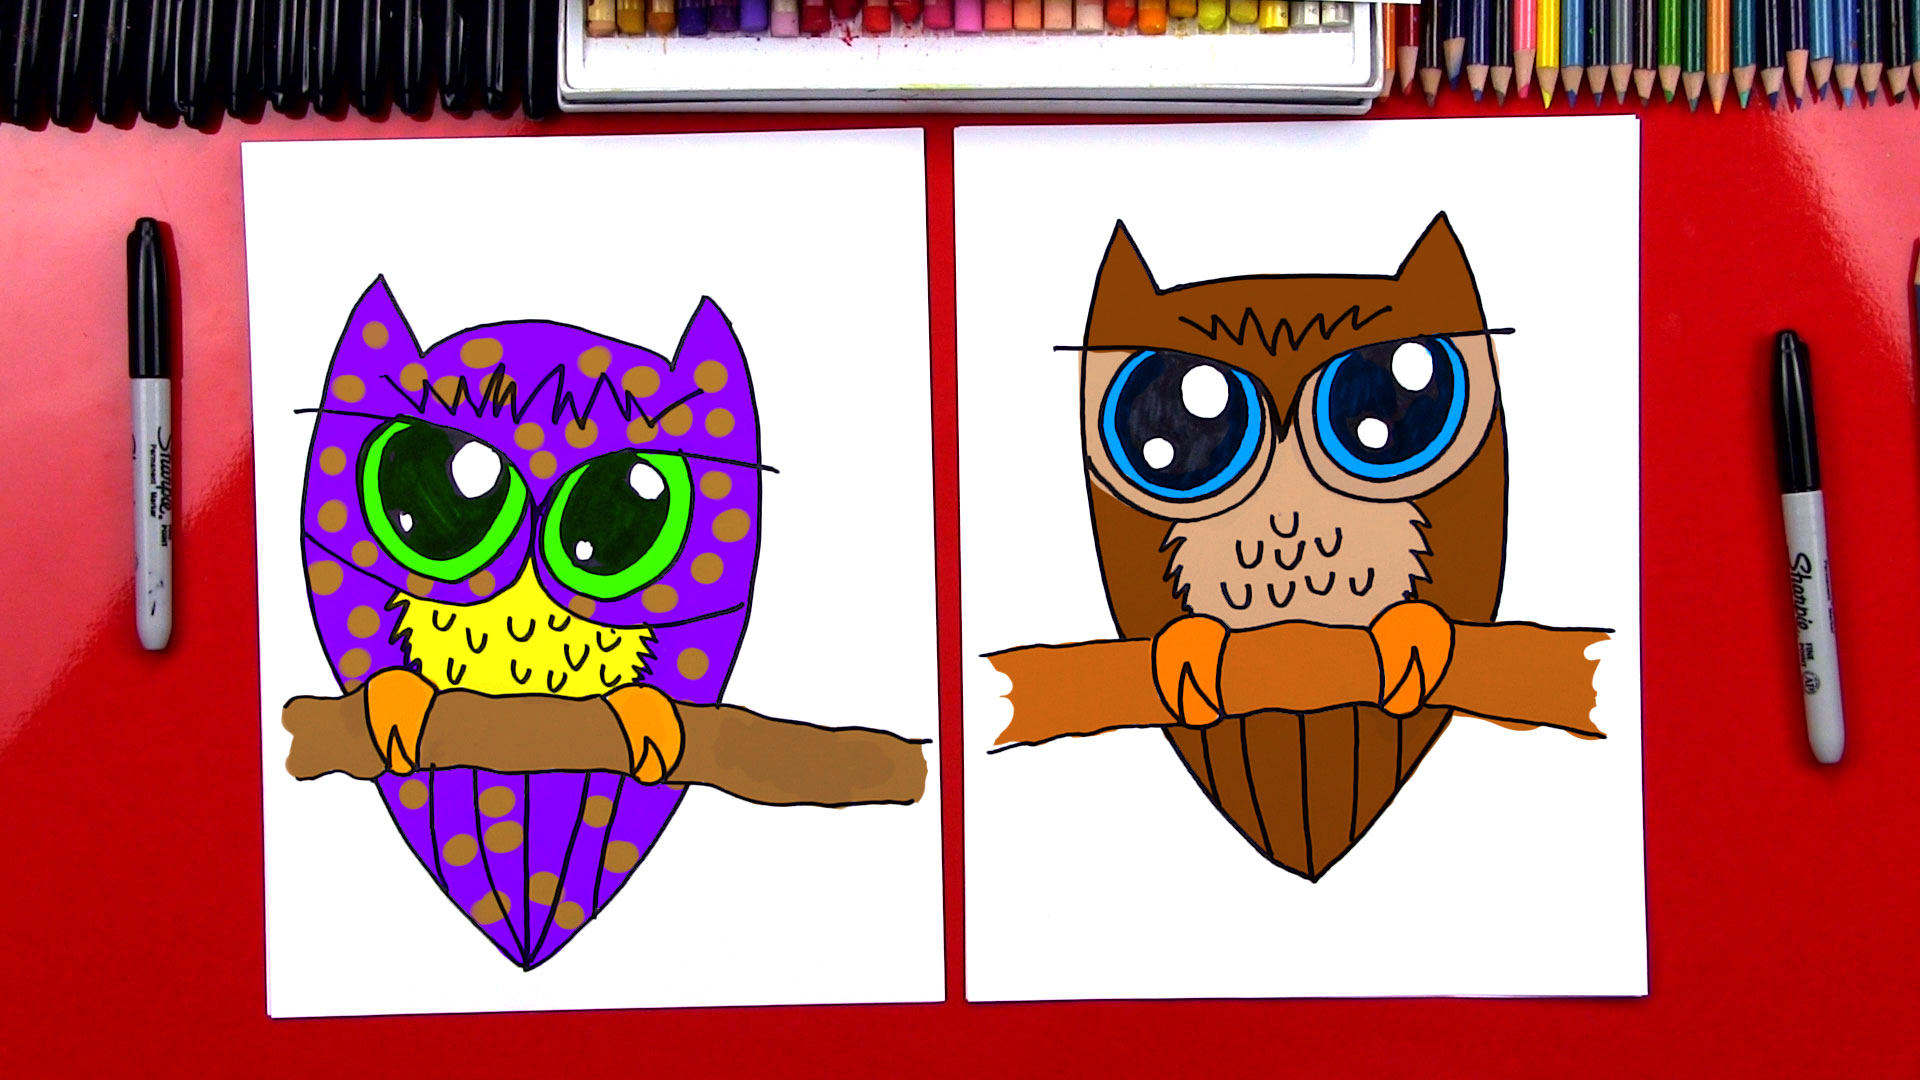 how to draw a cartoon owl step by step for kids